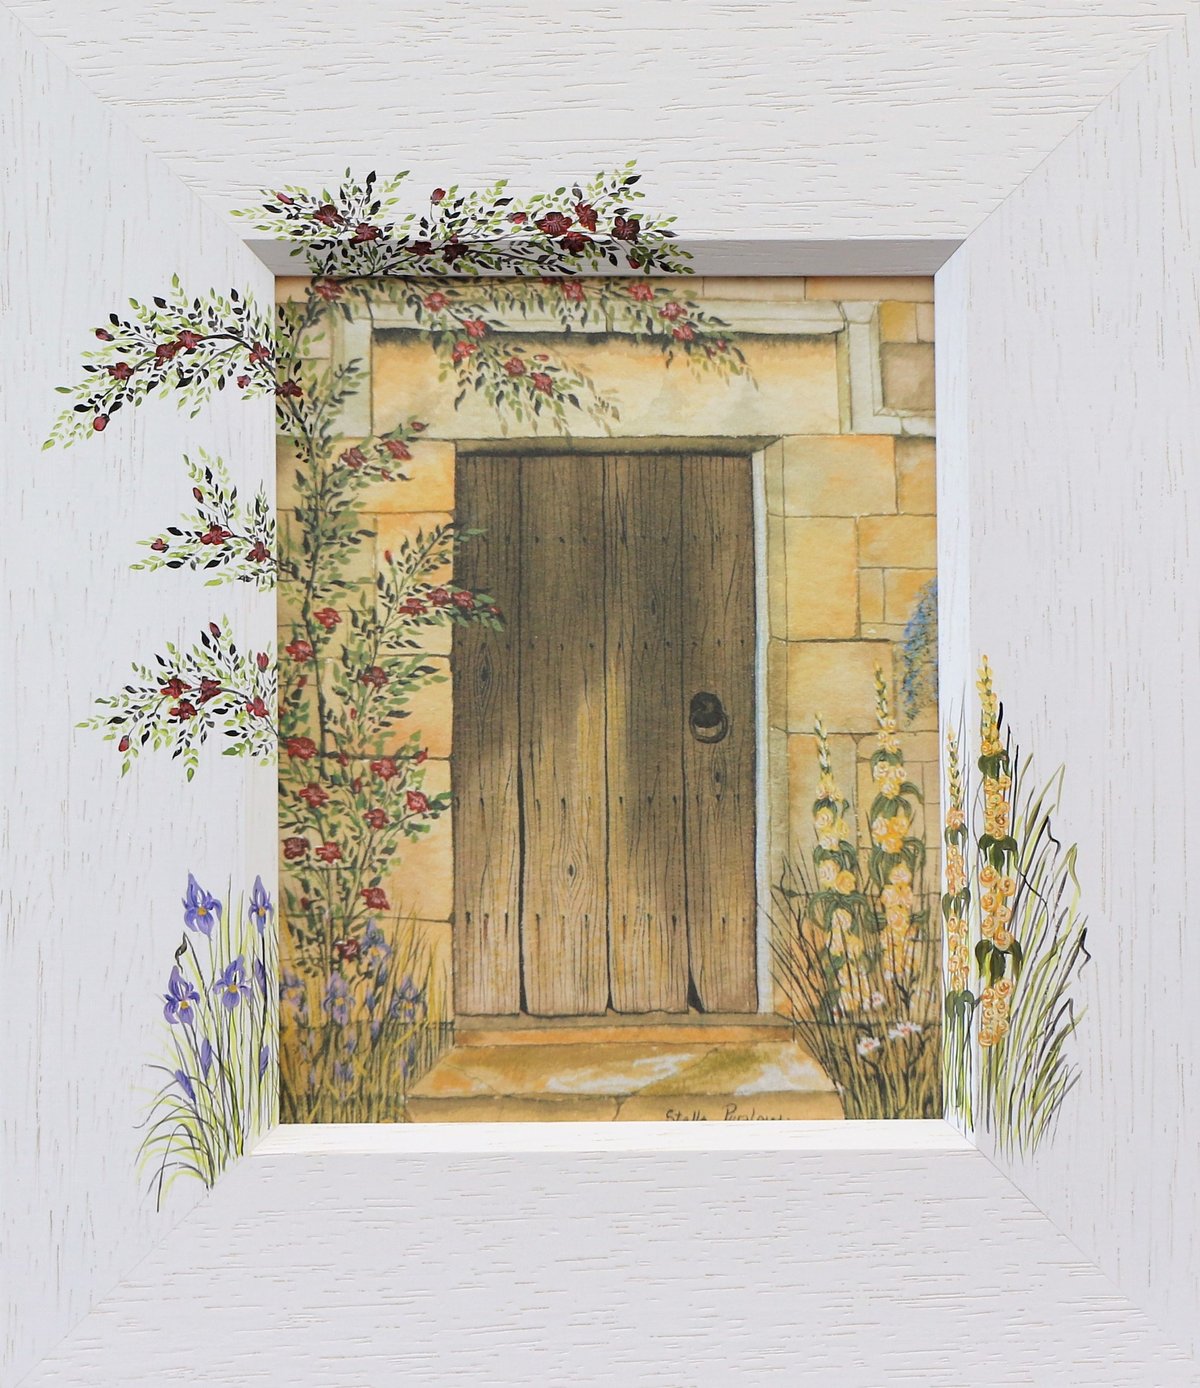 Image of Closed Cotswold Door 7949 - Open Edition Prints Doors Collection.